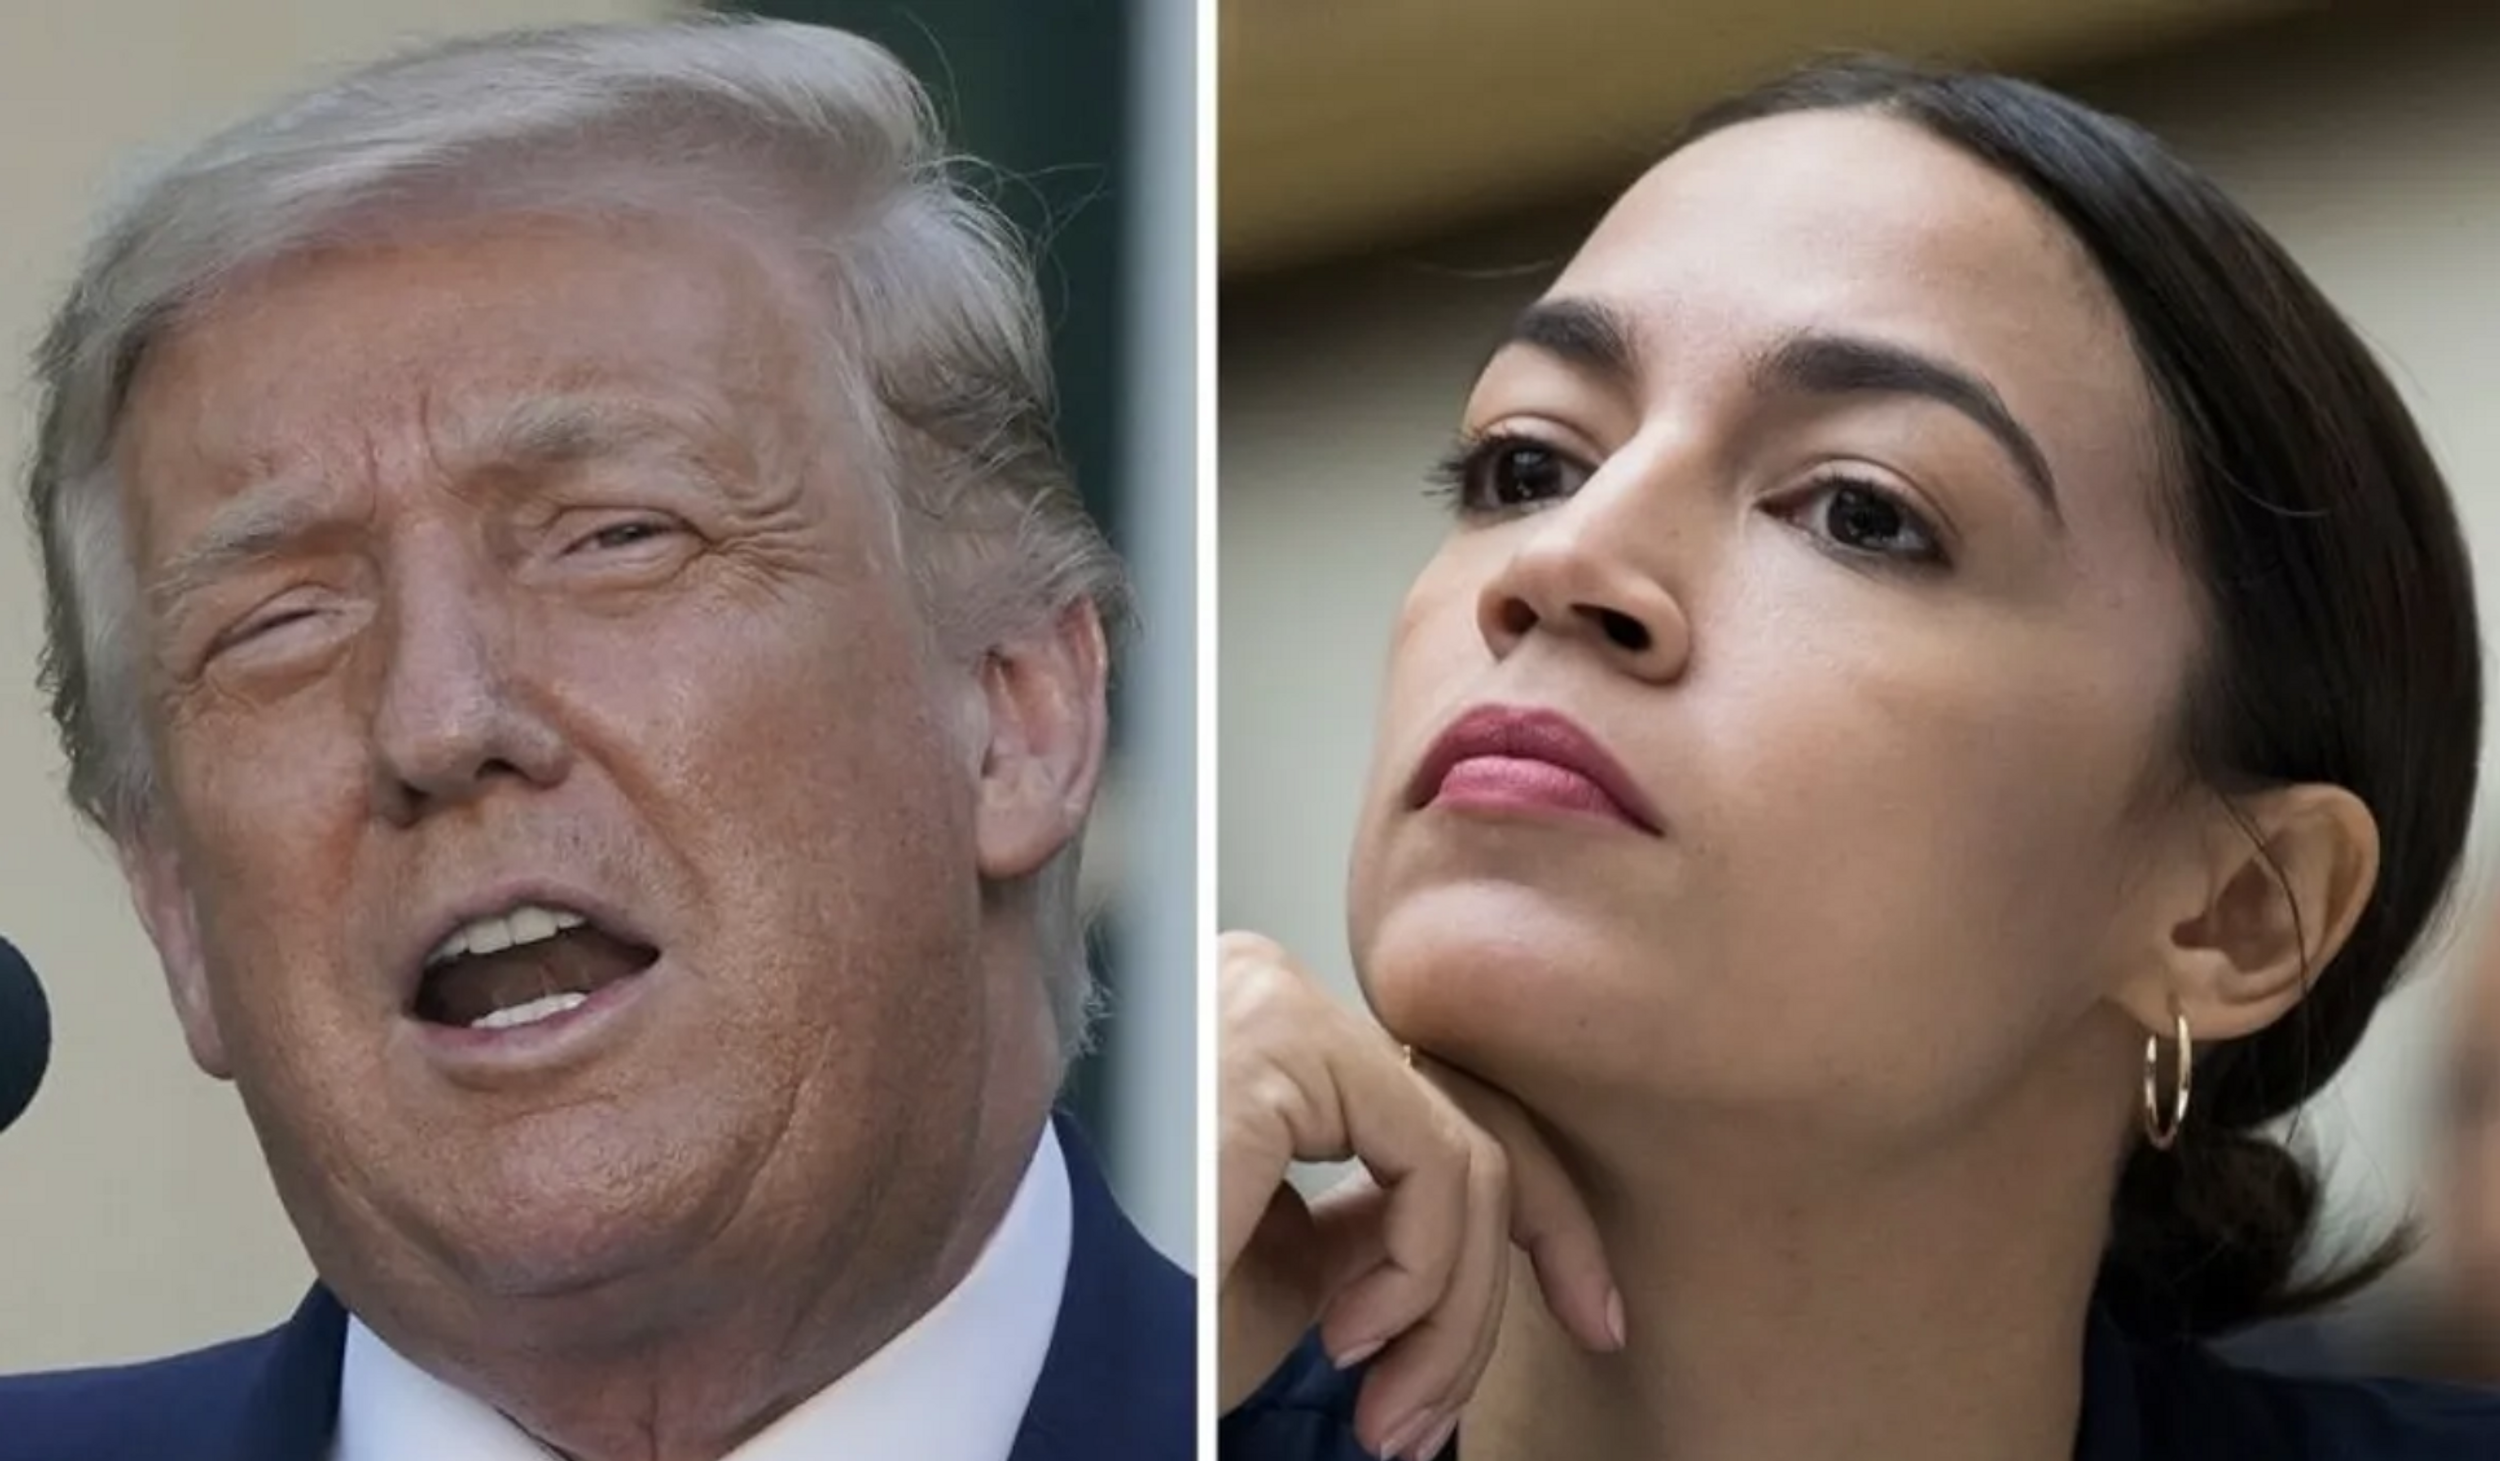 AOC Just Dragged Trump Hard After He Called Her 'Another Beauty' Who 'Knows Nothing'